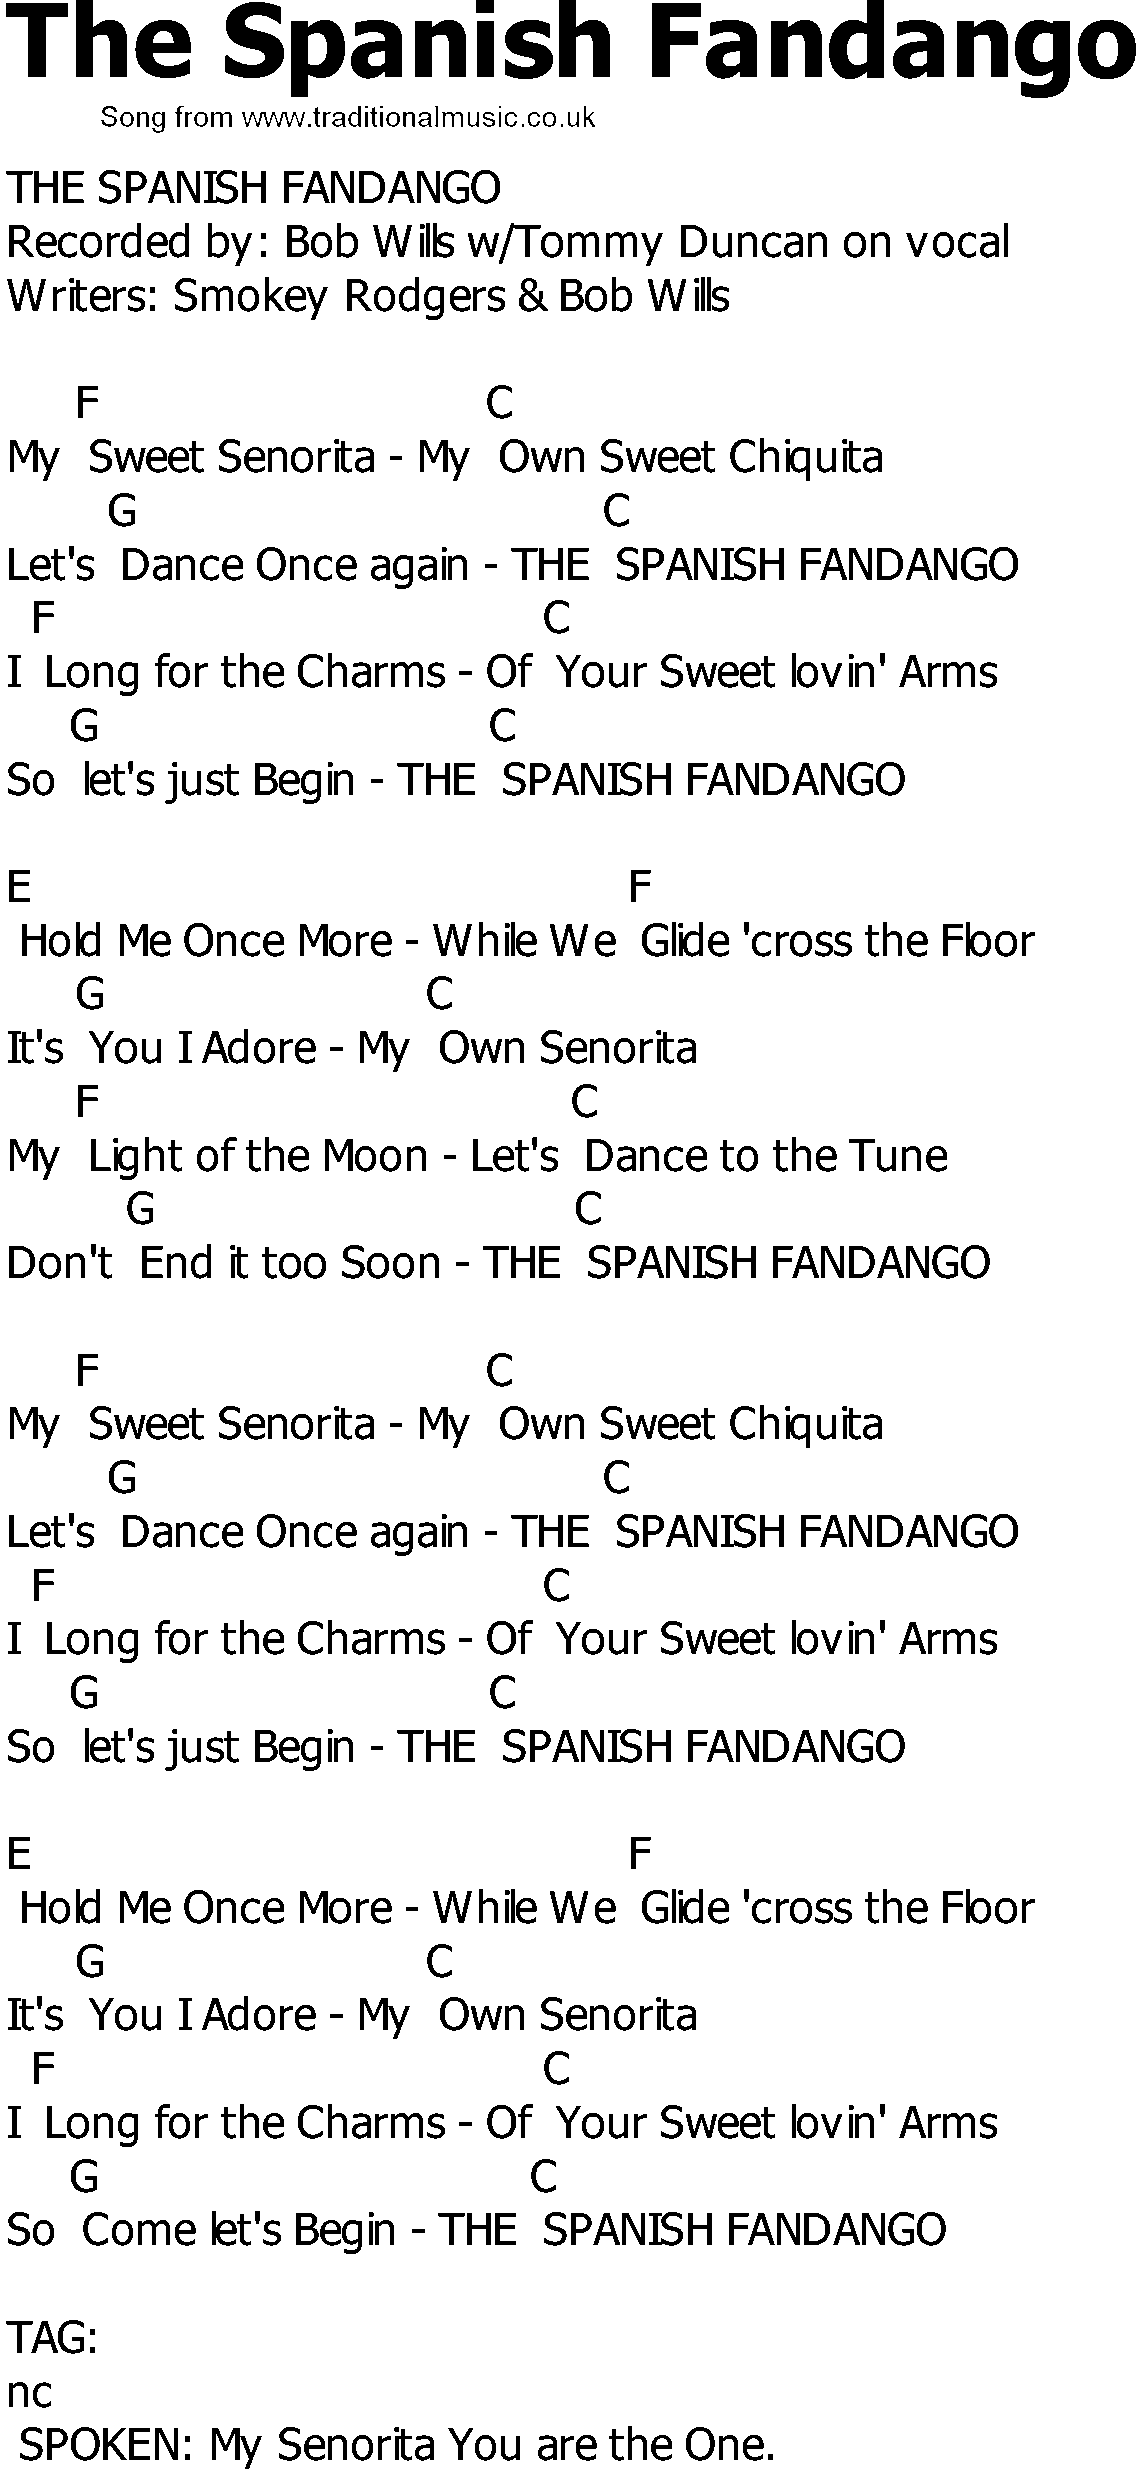 Old Country song lyrics with chords - The Spanish Fandango